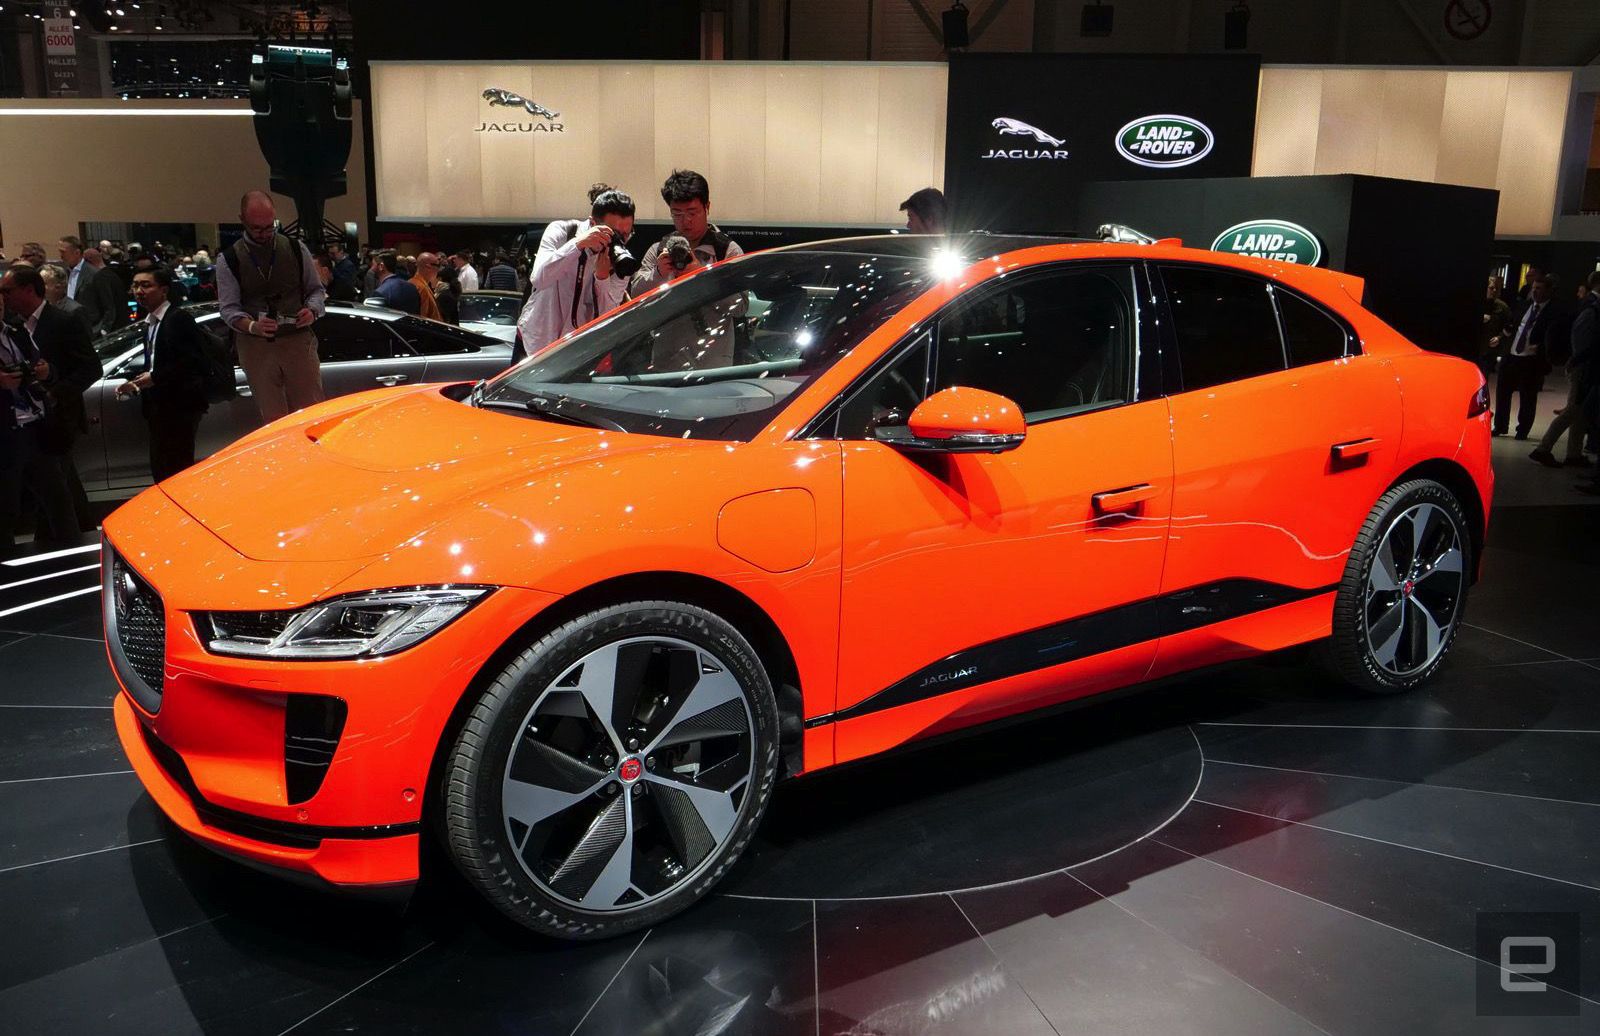 Jaguar to be 100% Electric by 2025